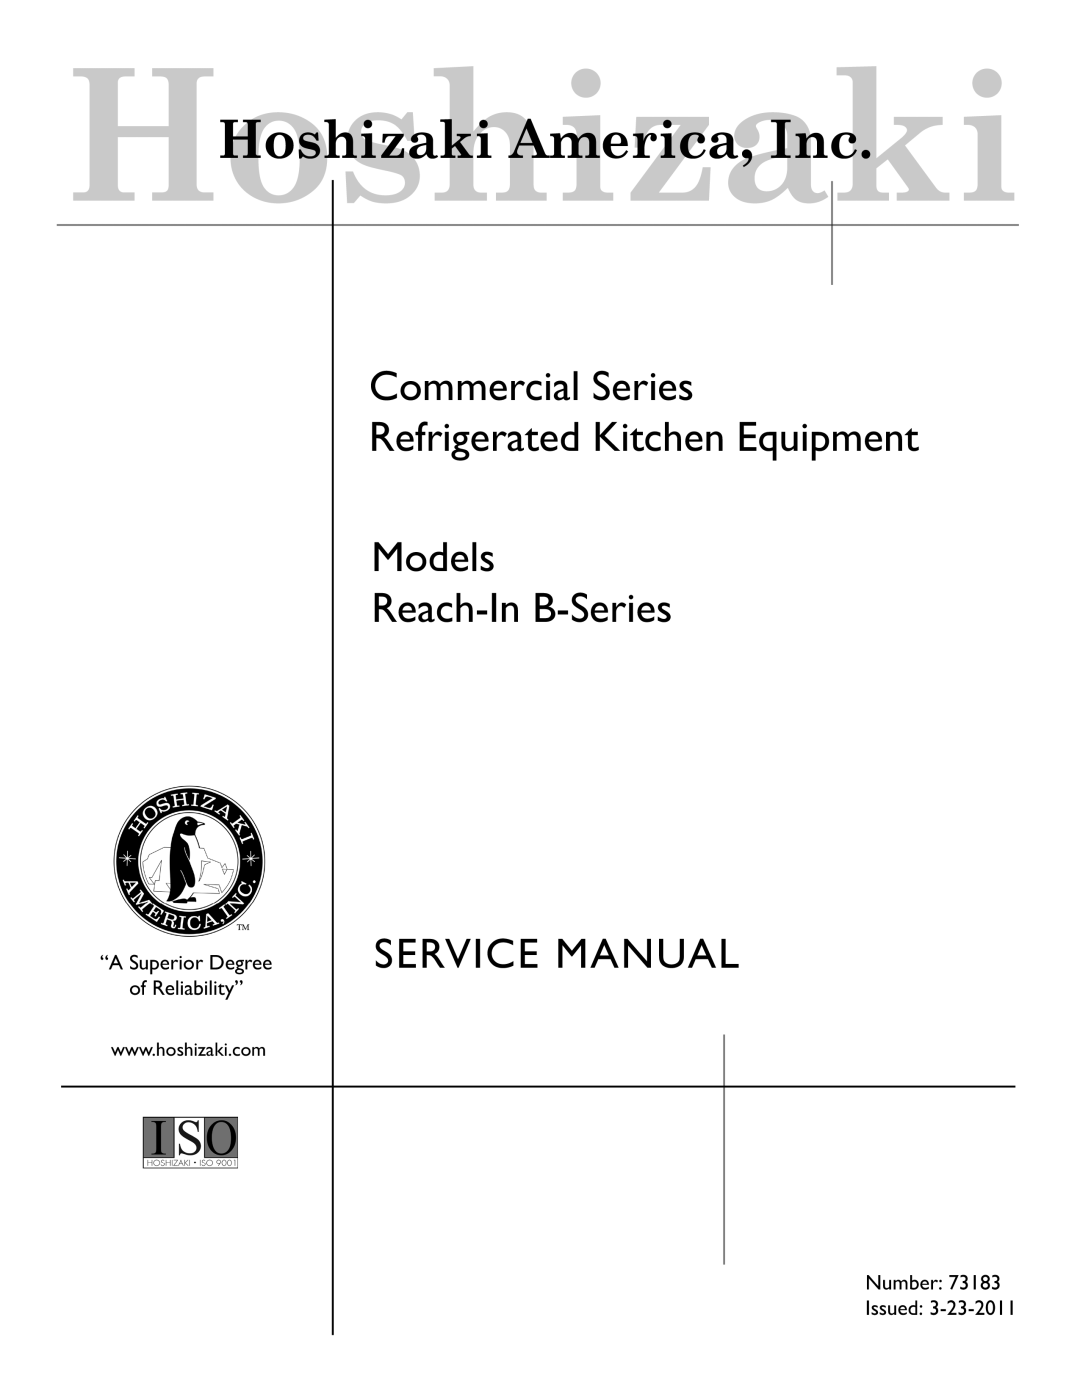 Hoshizaki 73183 service manual Commercial Series Refrigerated Kitchen Equipment Models, Reach-In B-Series 